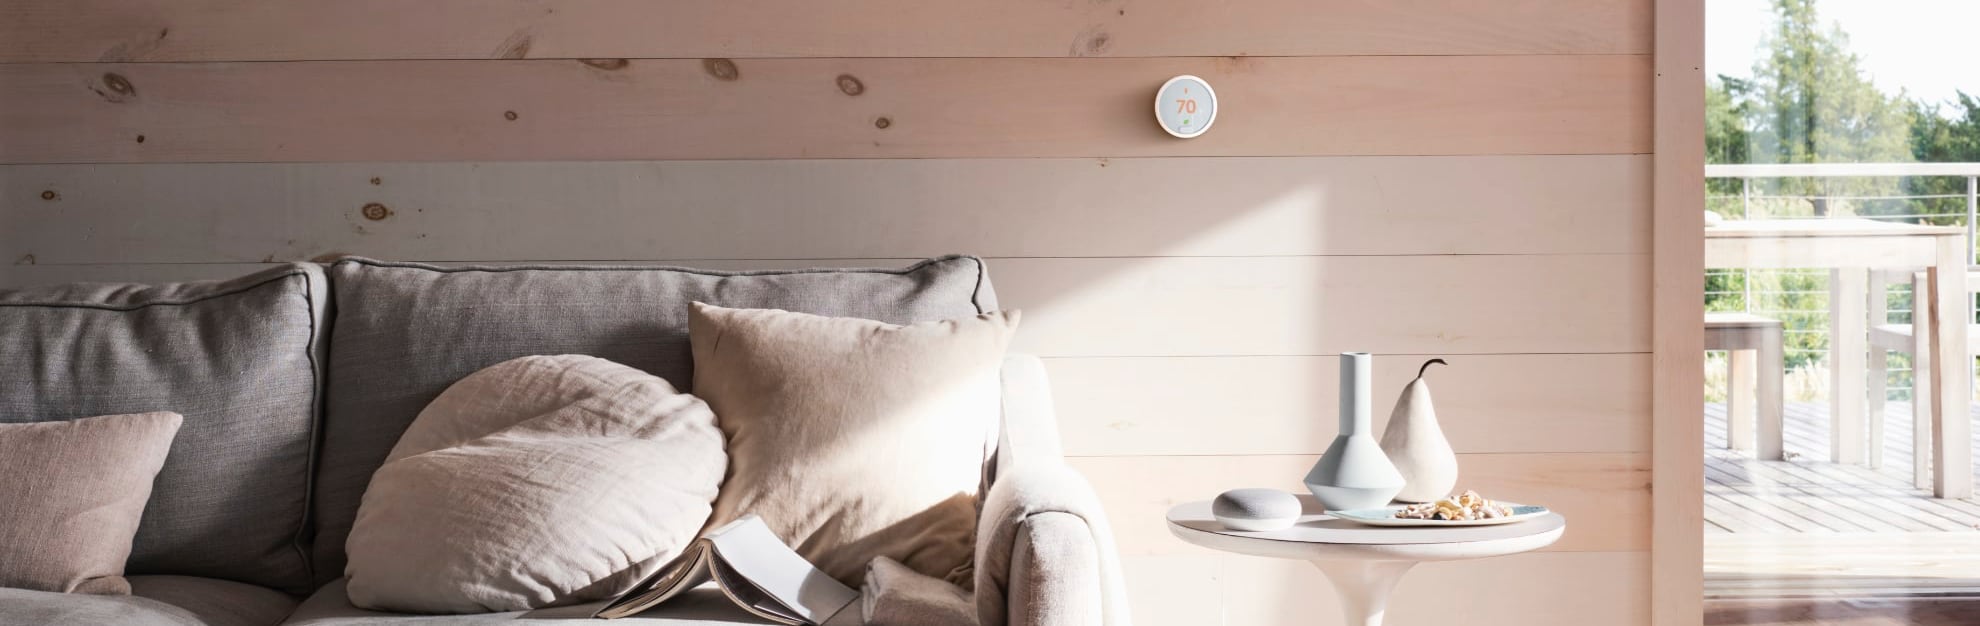 Vivint Home Automation in Louisville